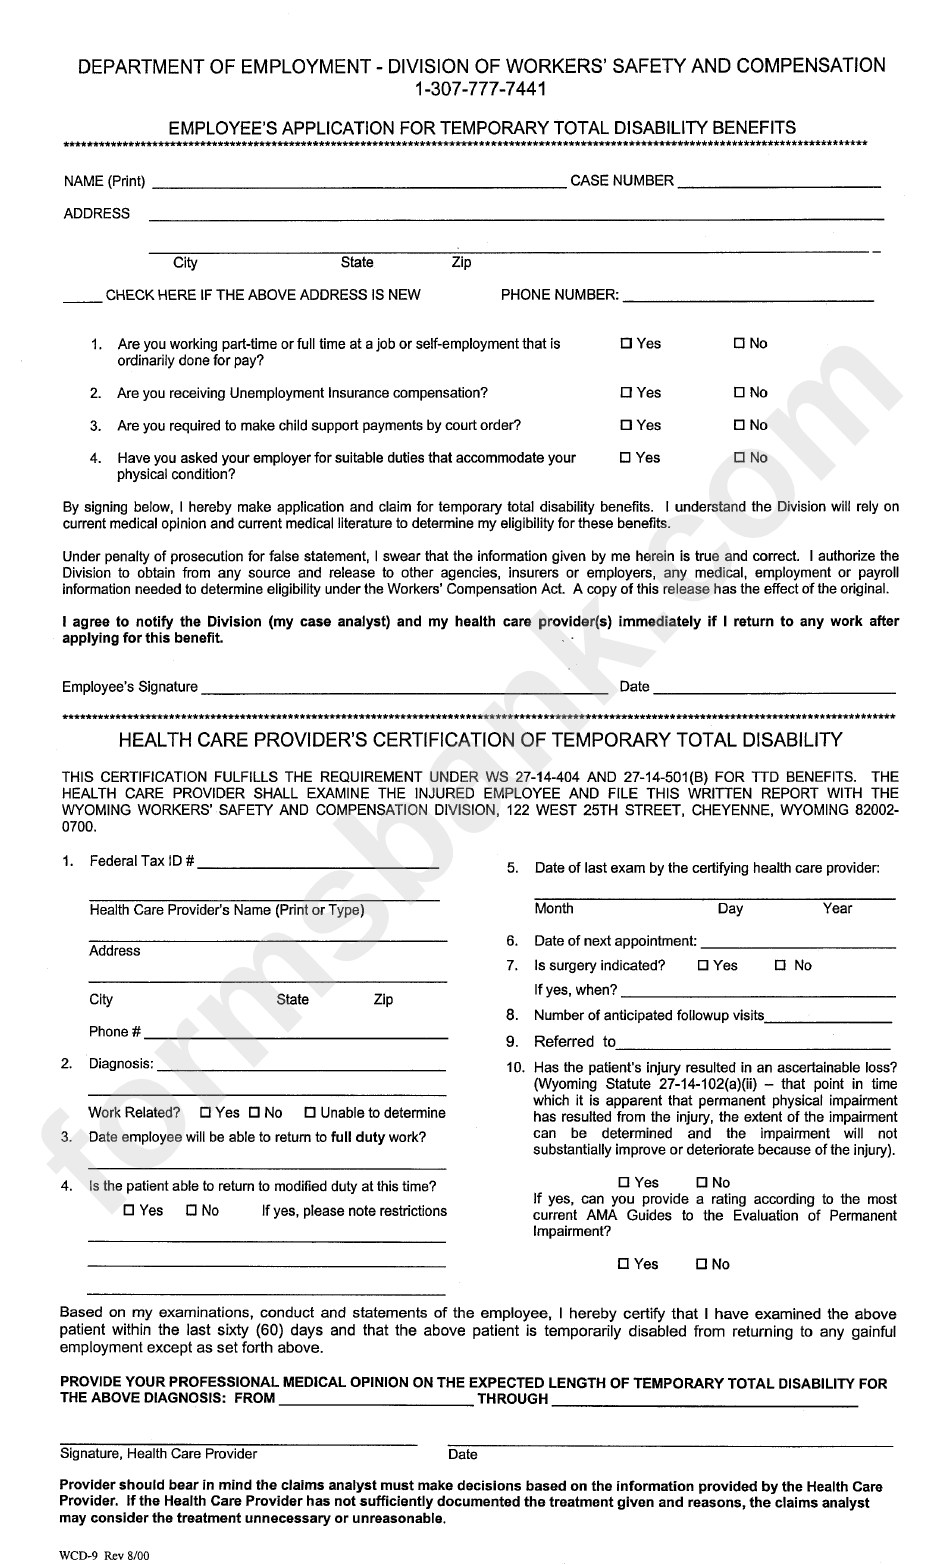 Form Wcd-9 - Employee'S Application For Temporary Total Disability Benefits printable pdf download